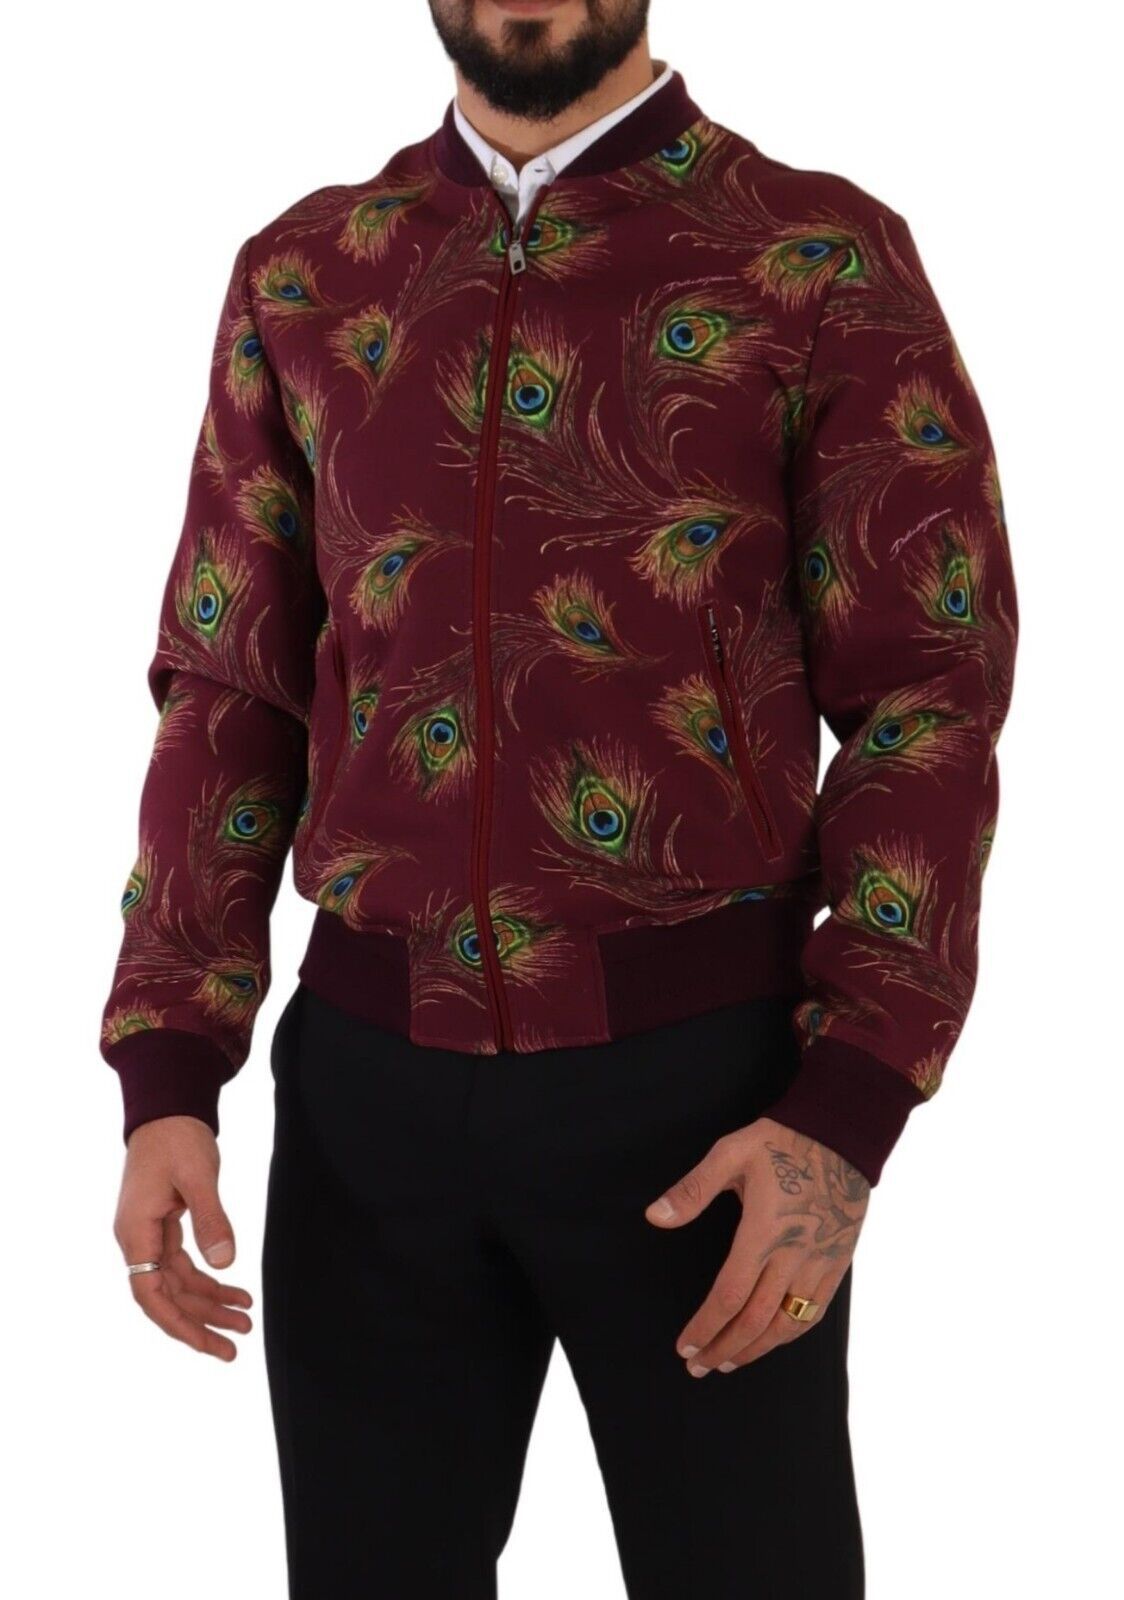 Radiant Red Peacock Print Bomber Jacket